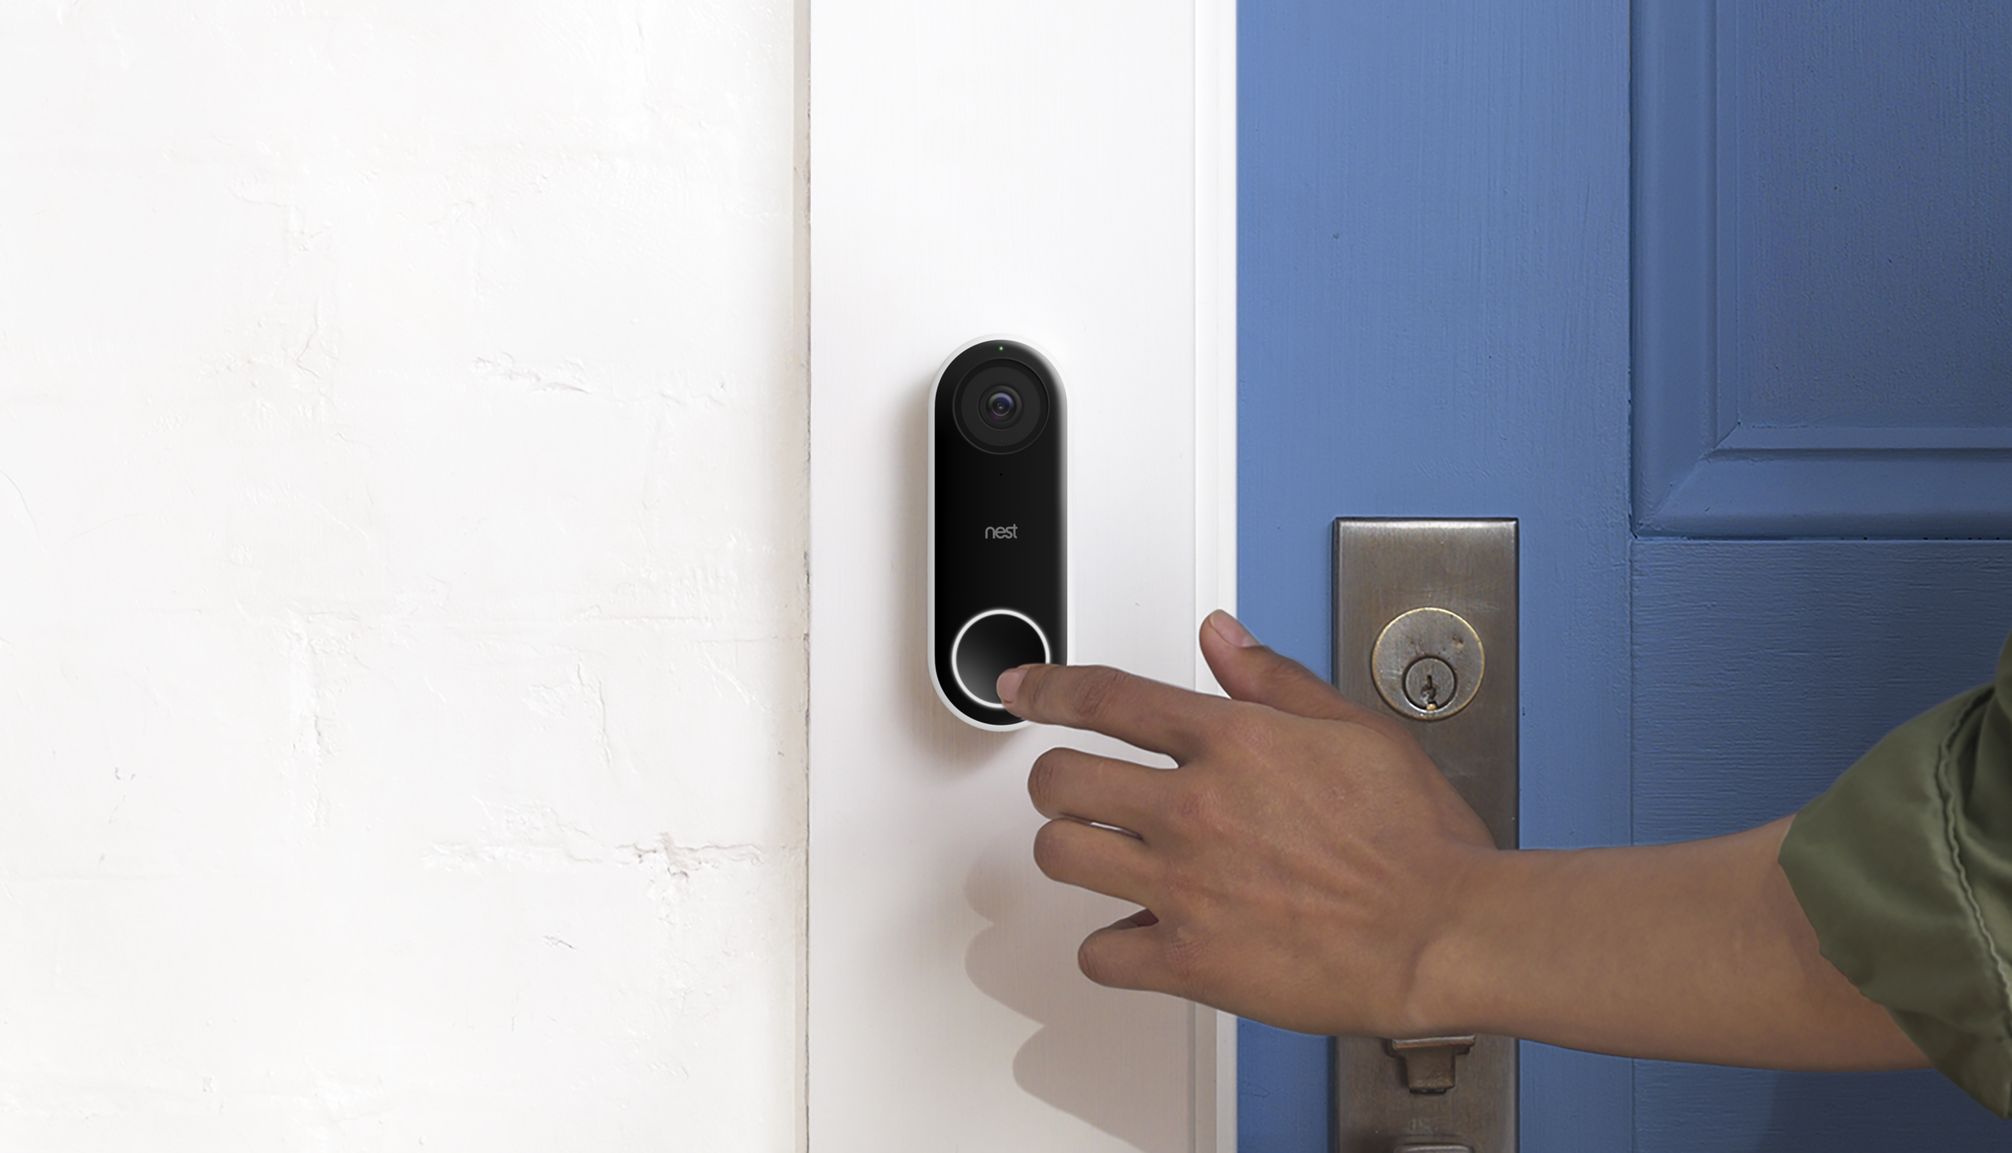 Welcome here: created doorbell with facial recognition